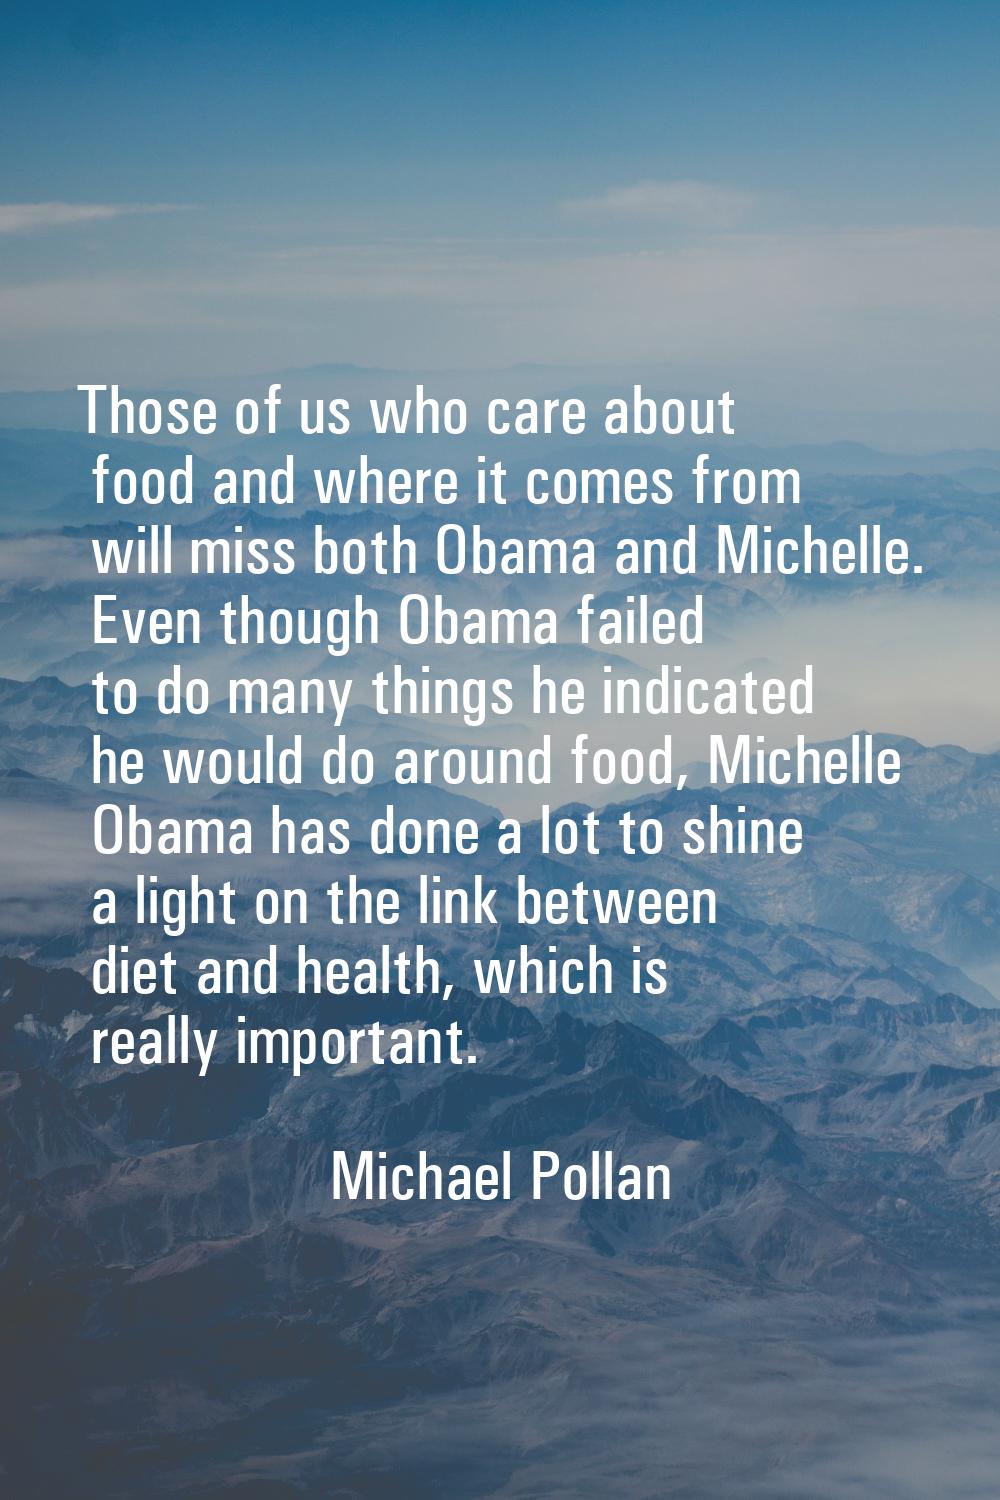 Those of us who care about food and where it comes from will miss both Obama and Michelle. Even tho